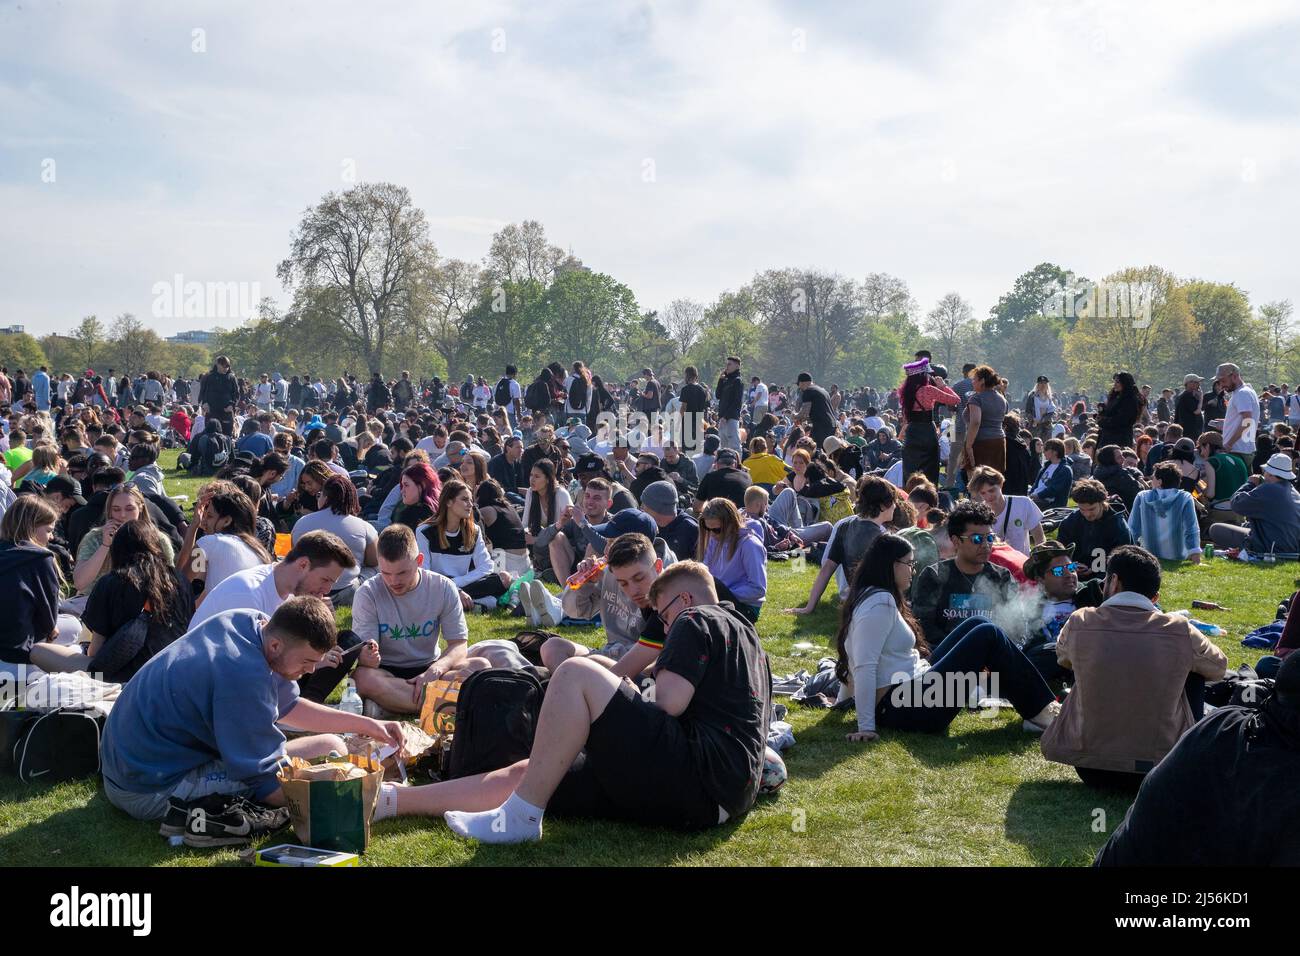 LONDON, APRIL 20 2022. Thousands gather in London's Hyde Park to celebrate 4/20 otherwise known as World Weed Day,: The event is observed annually across the world by cannabis smokers in protest for the legalization of marijuana. Stock Photo